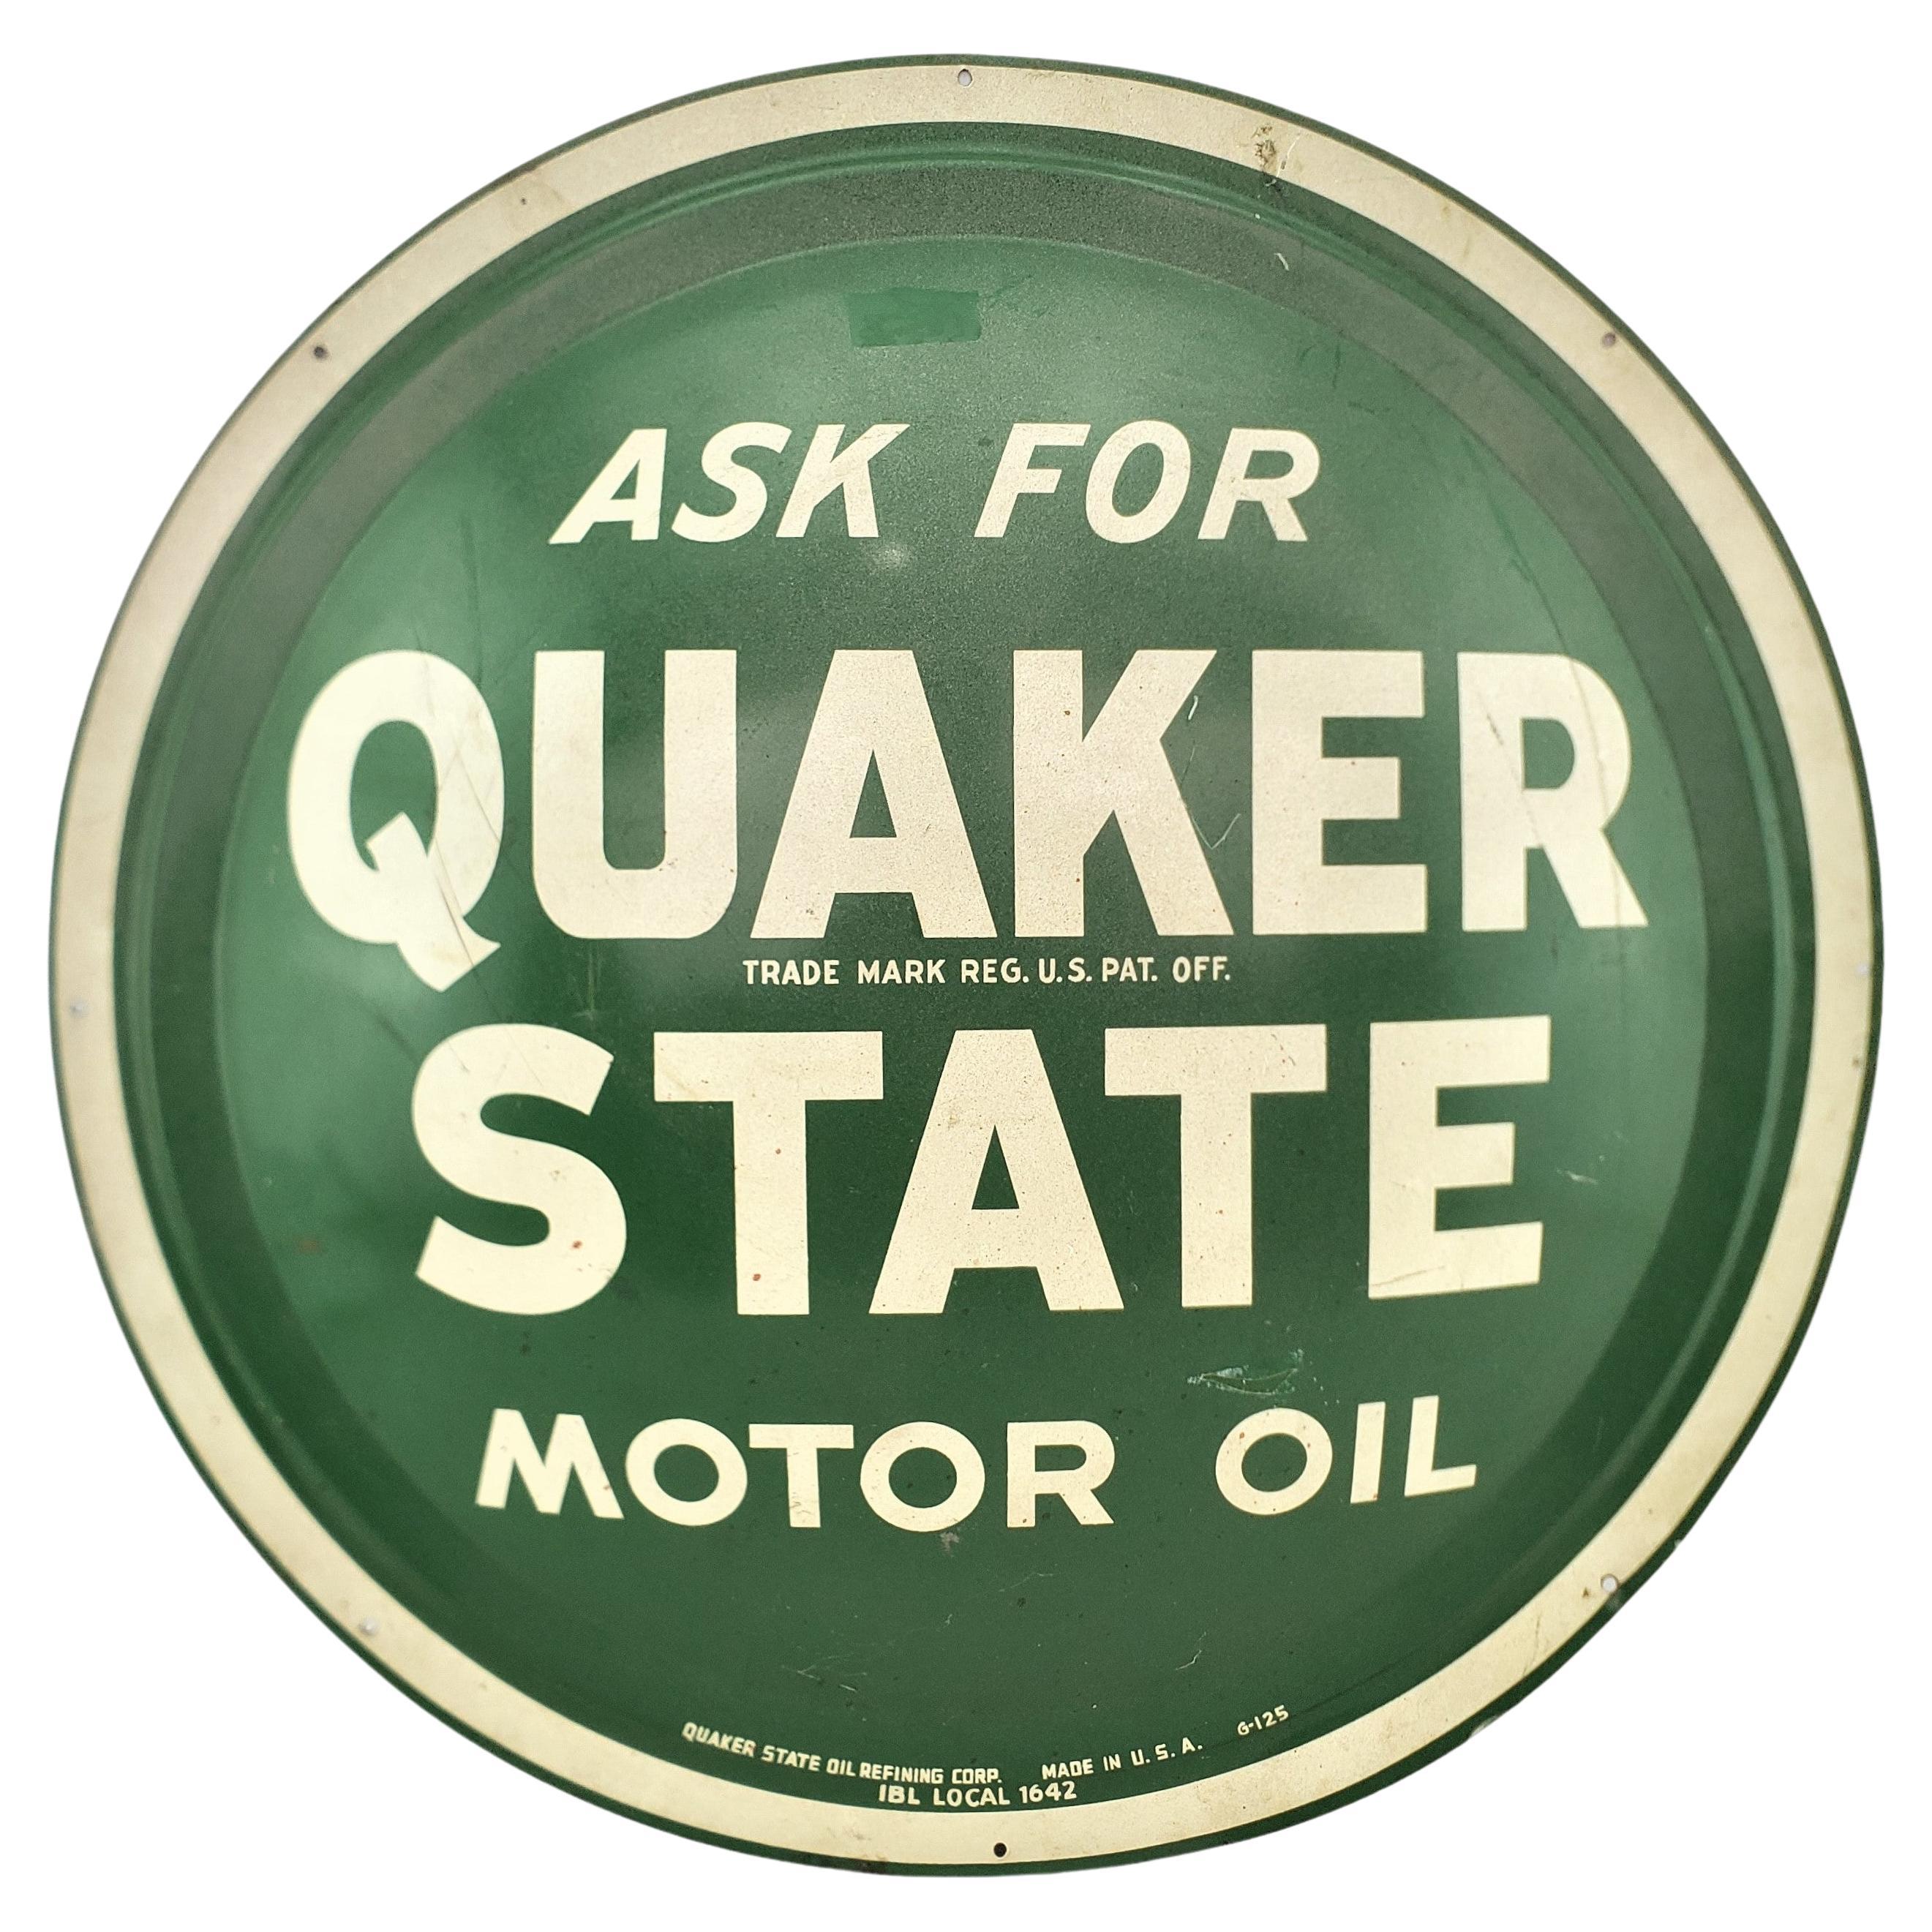 Midcentury Quaker State Motor Oil Gas Station Metal Advertising 'Button' Sign